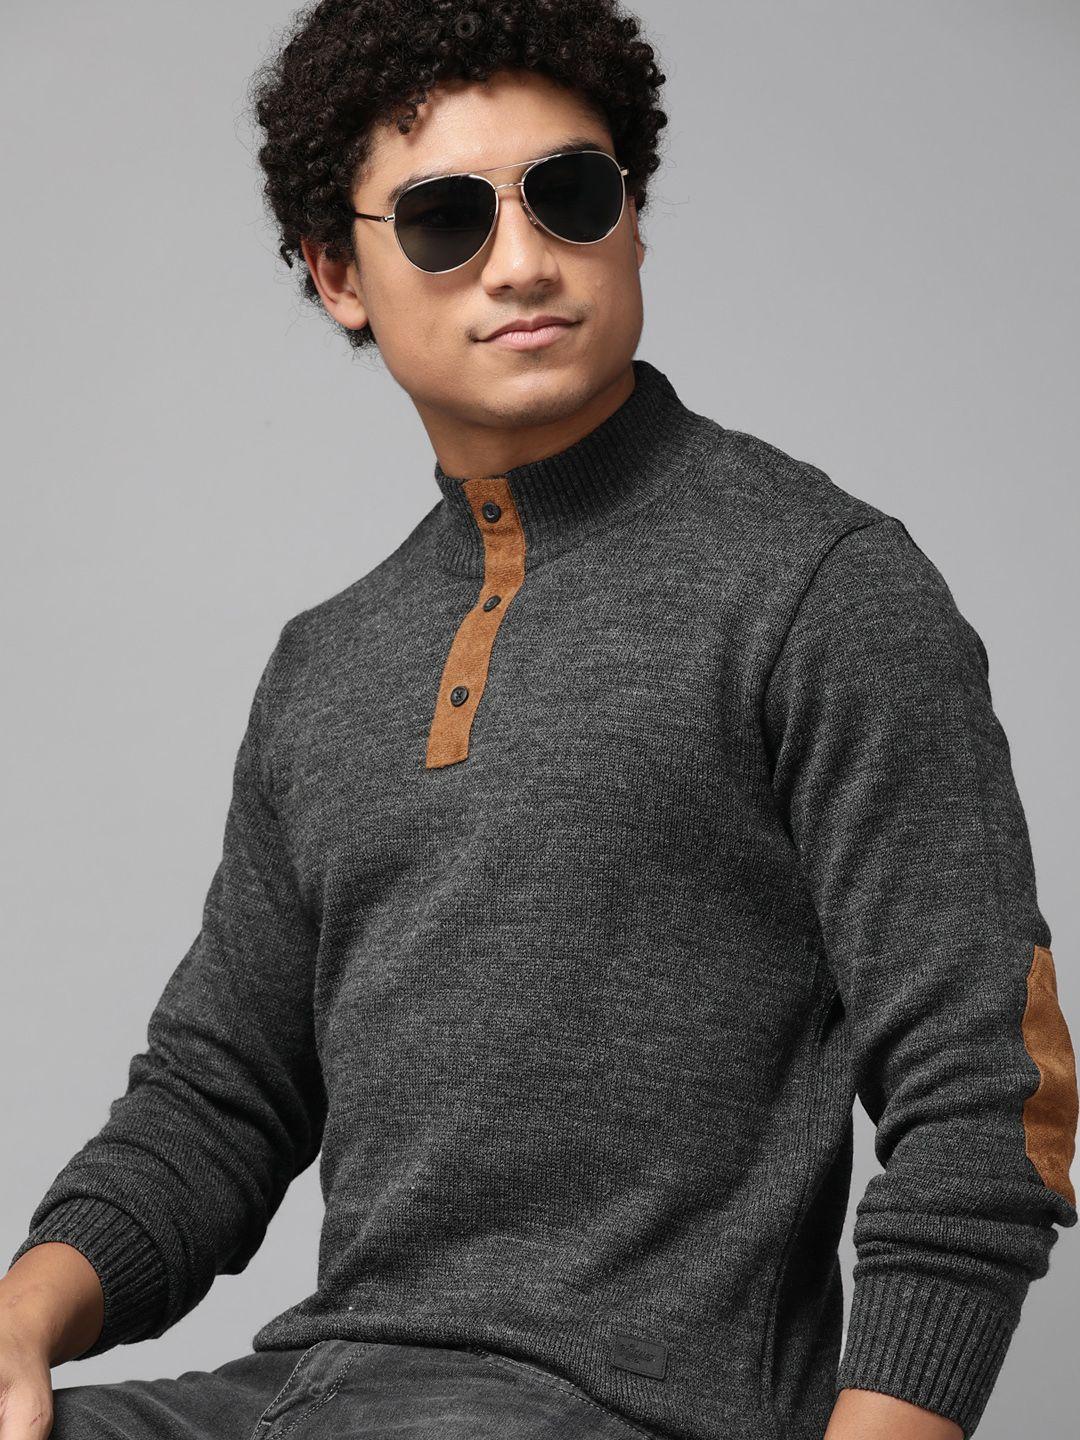 the roadster lifestyle co. men charcoal grey high neck acrylic pullover